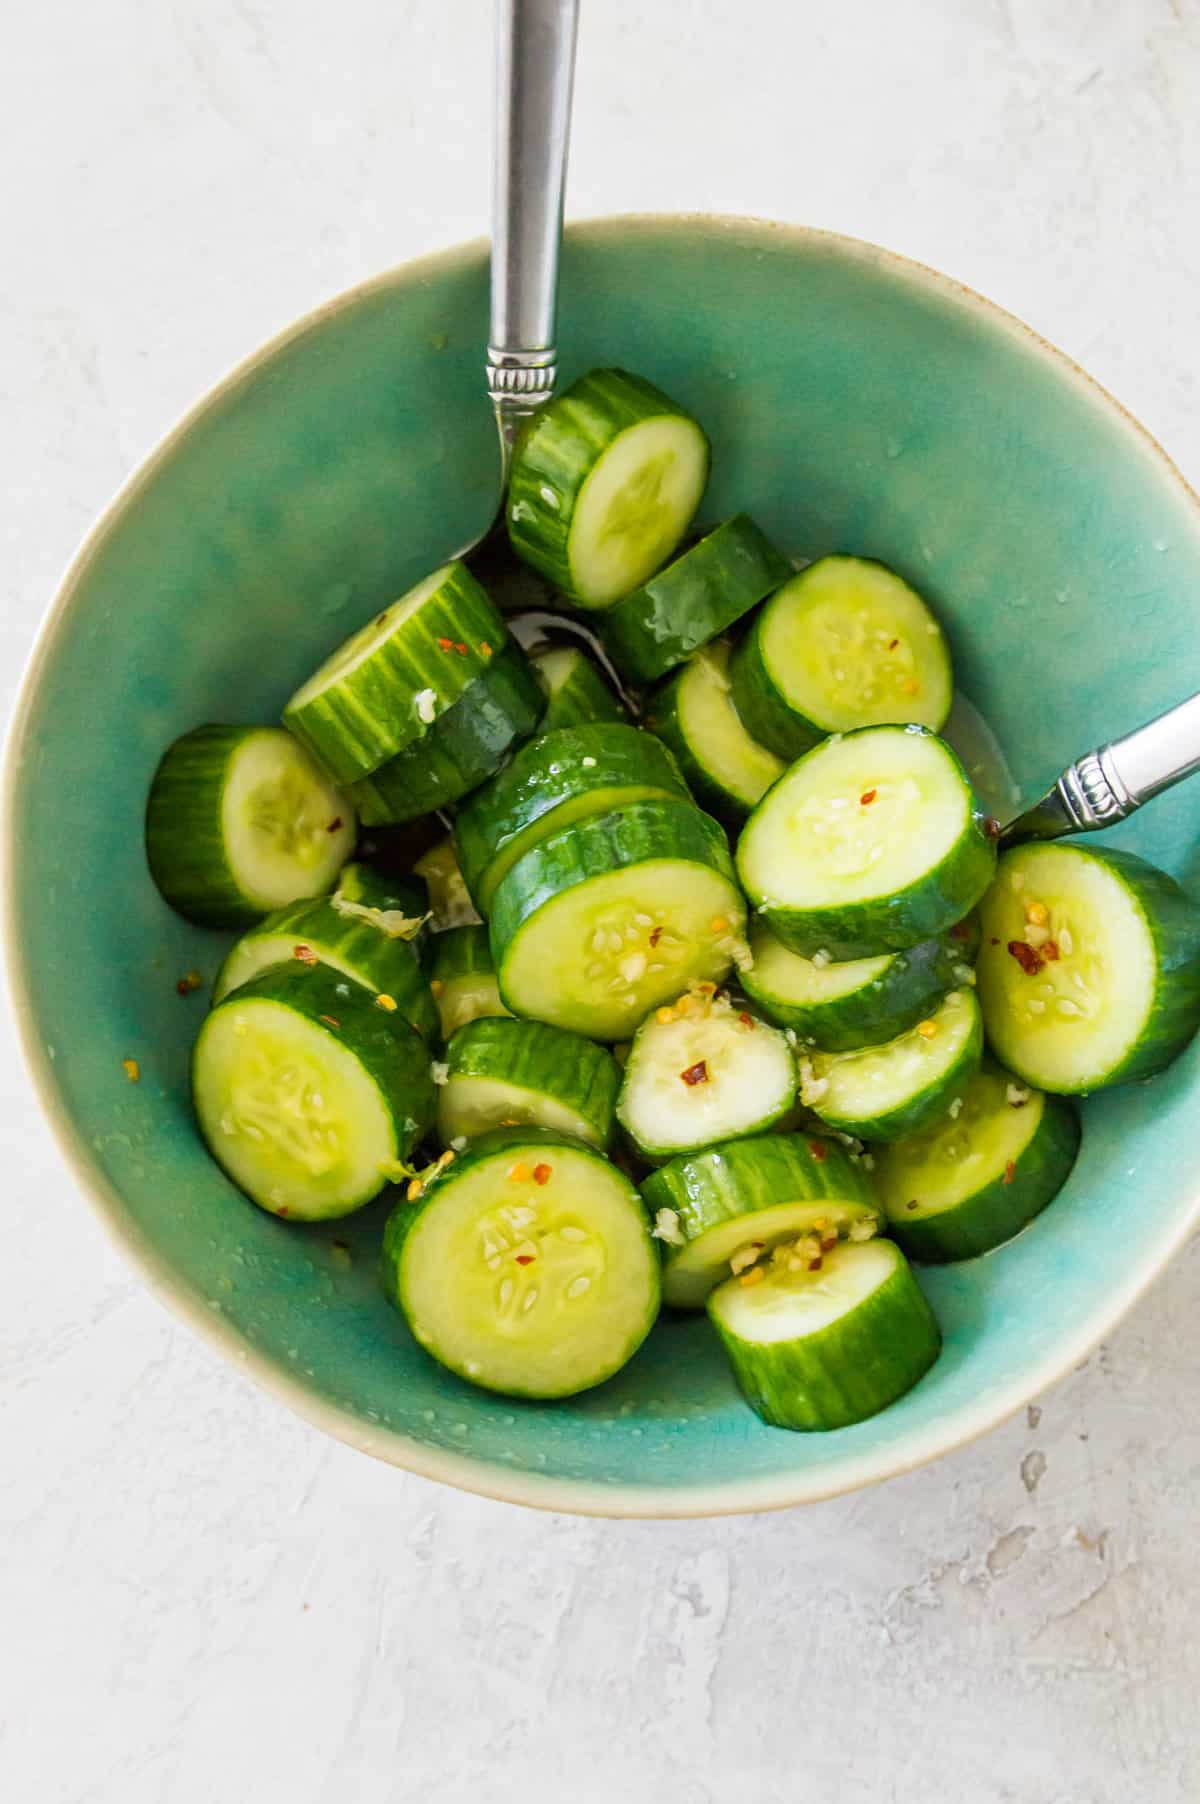 Sliced cucumbers in a bowl with a dressing on them and spoons in the bowl.